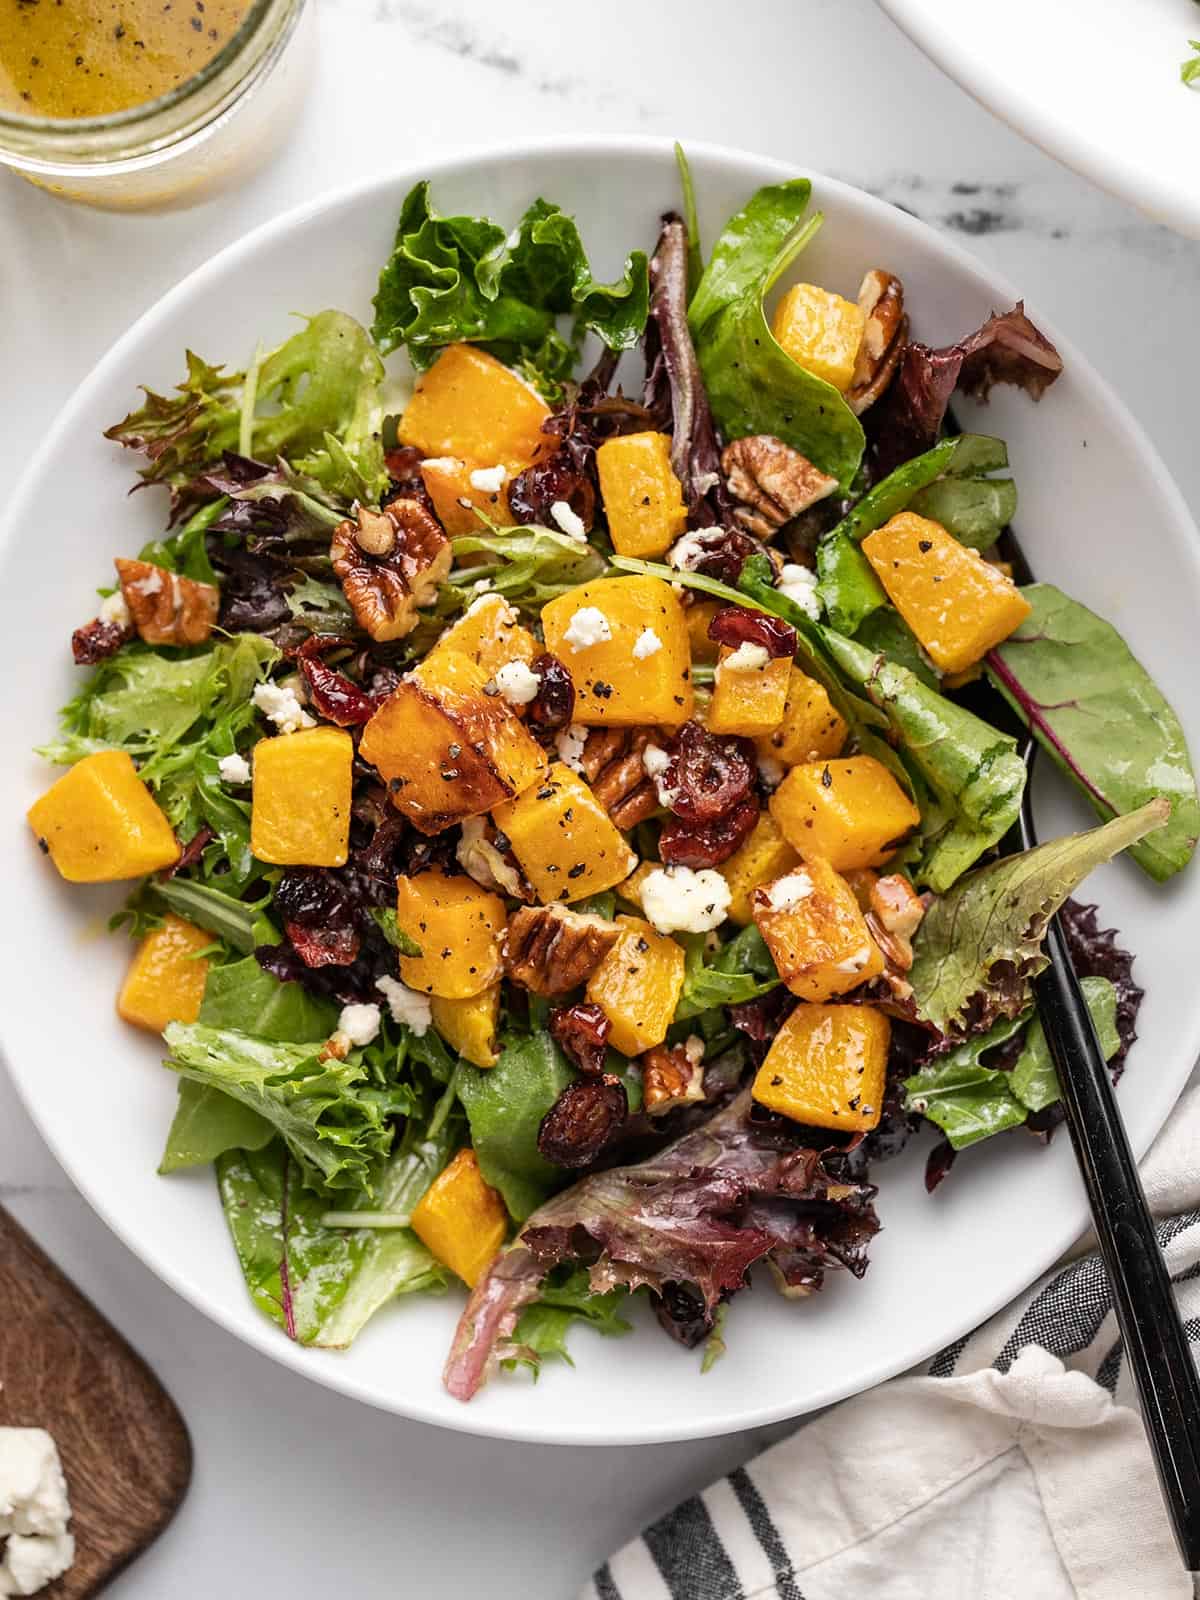 Overhead view of a butternut squash salad in a bowl with a fork.